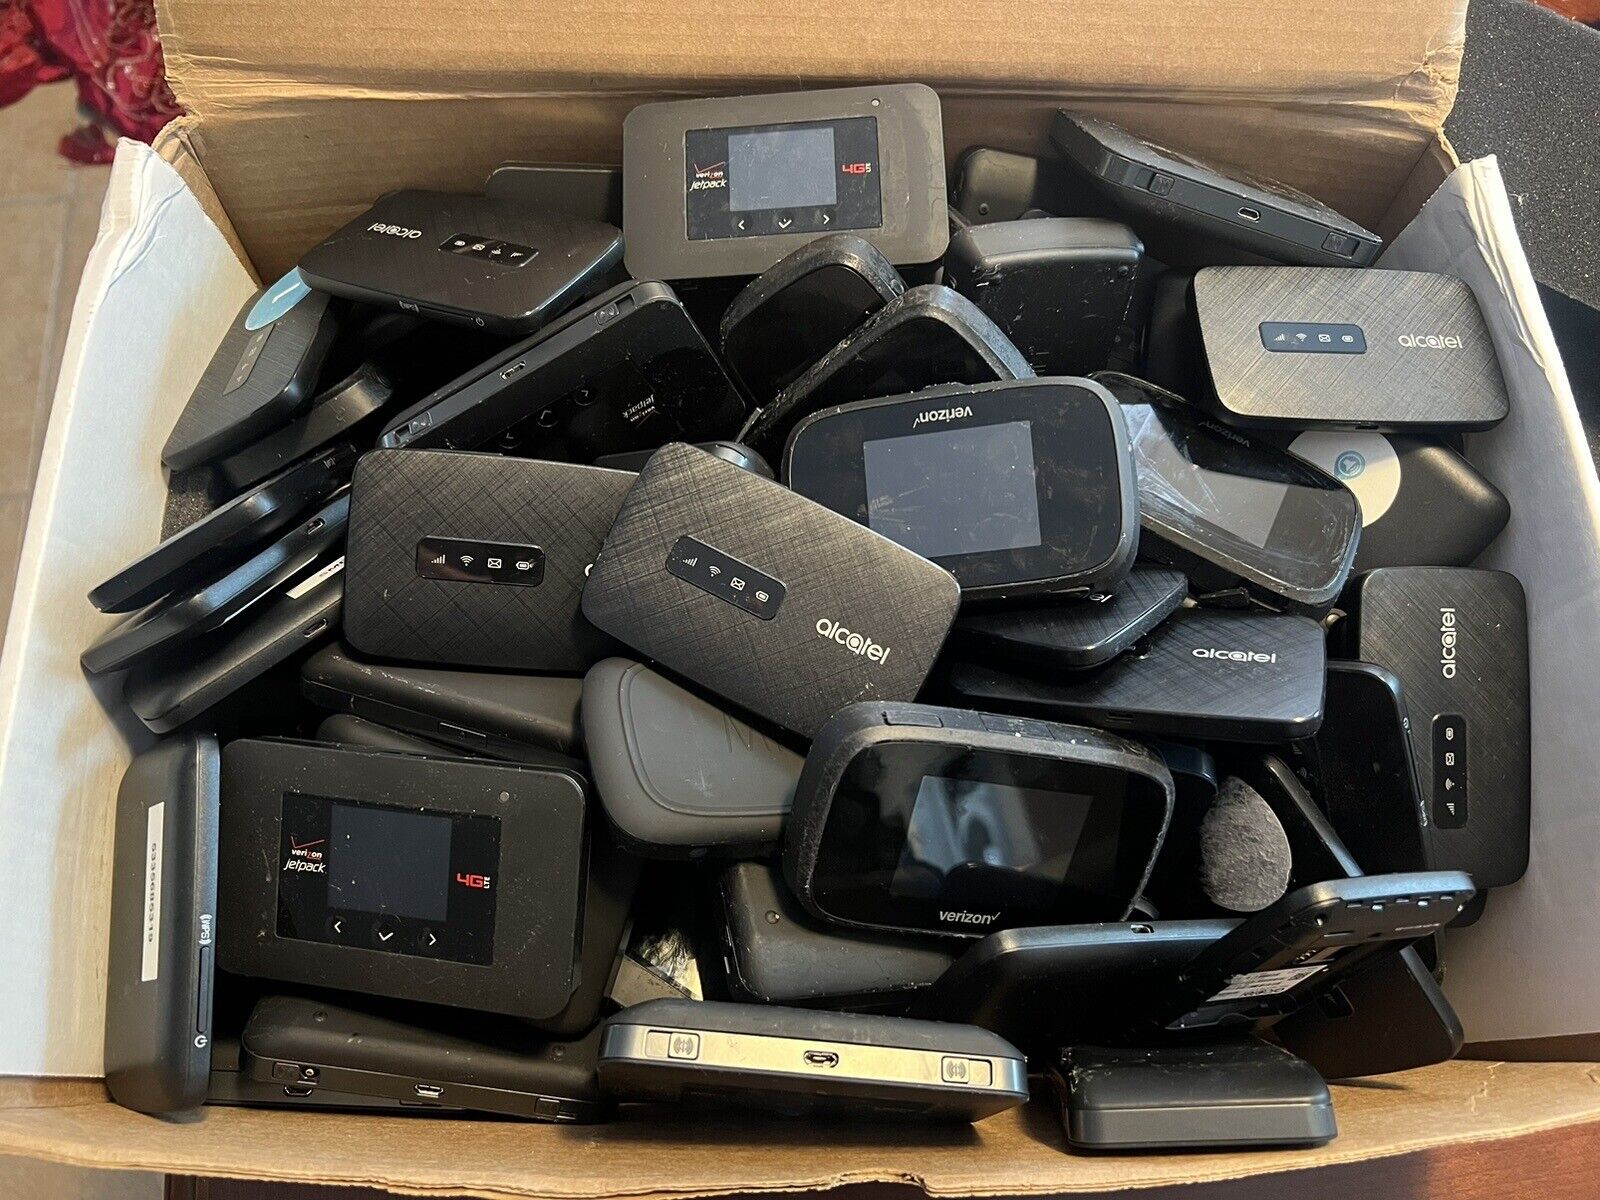 Lot of Assorted Unlocked 4g LTE Mobile WiFi MiFi Hotspots - 117 units - As is